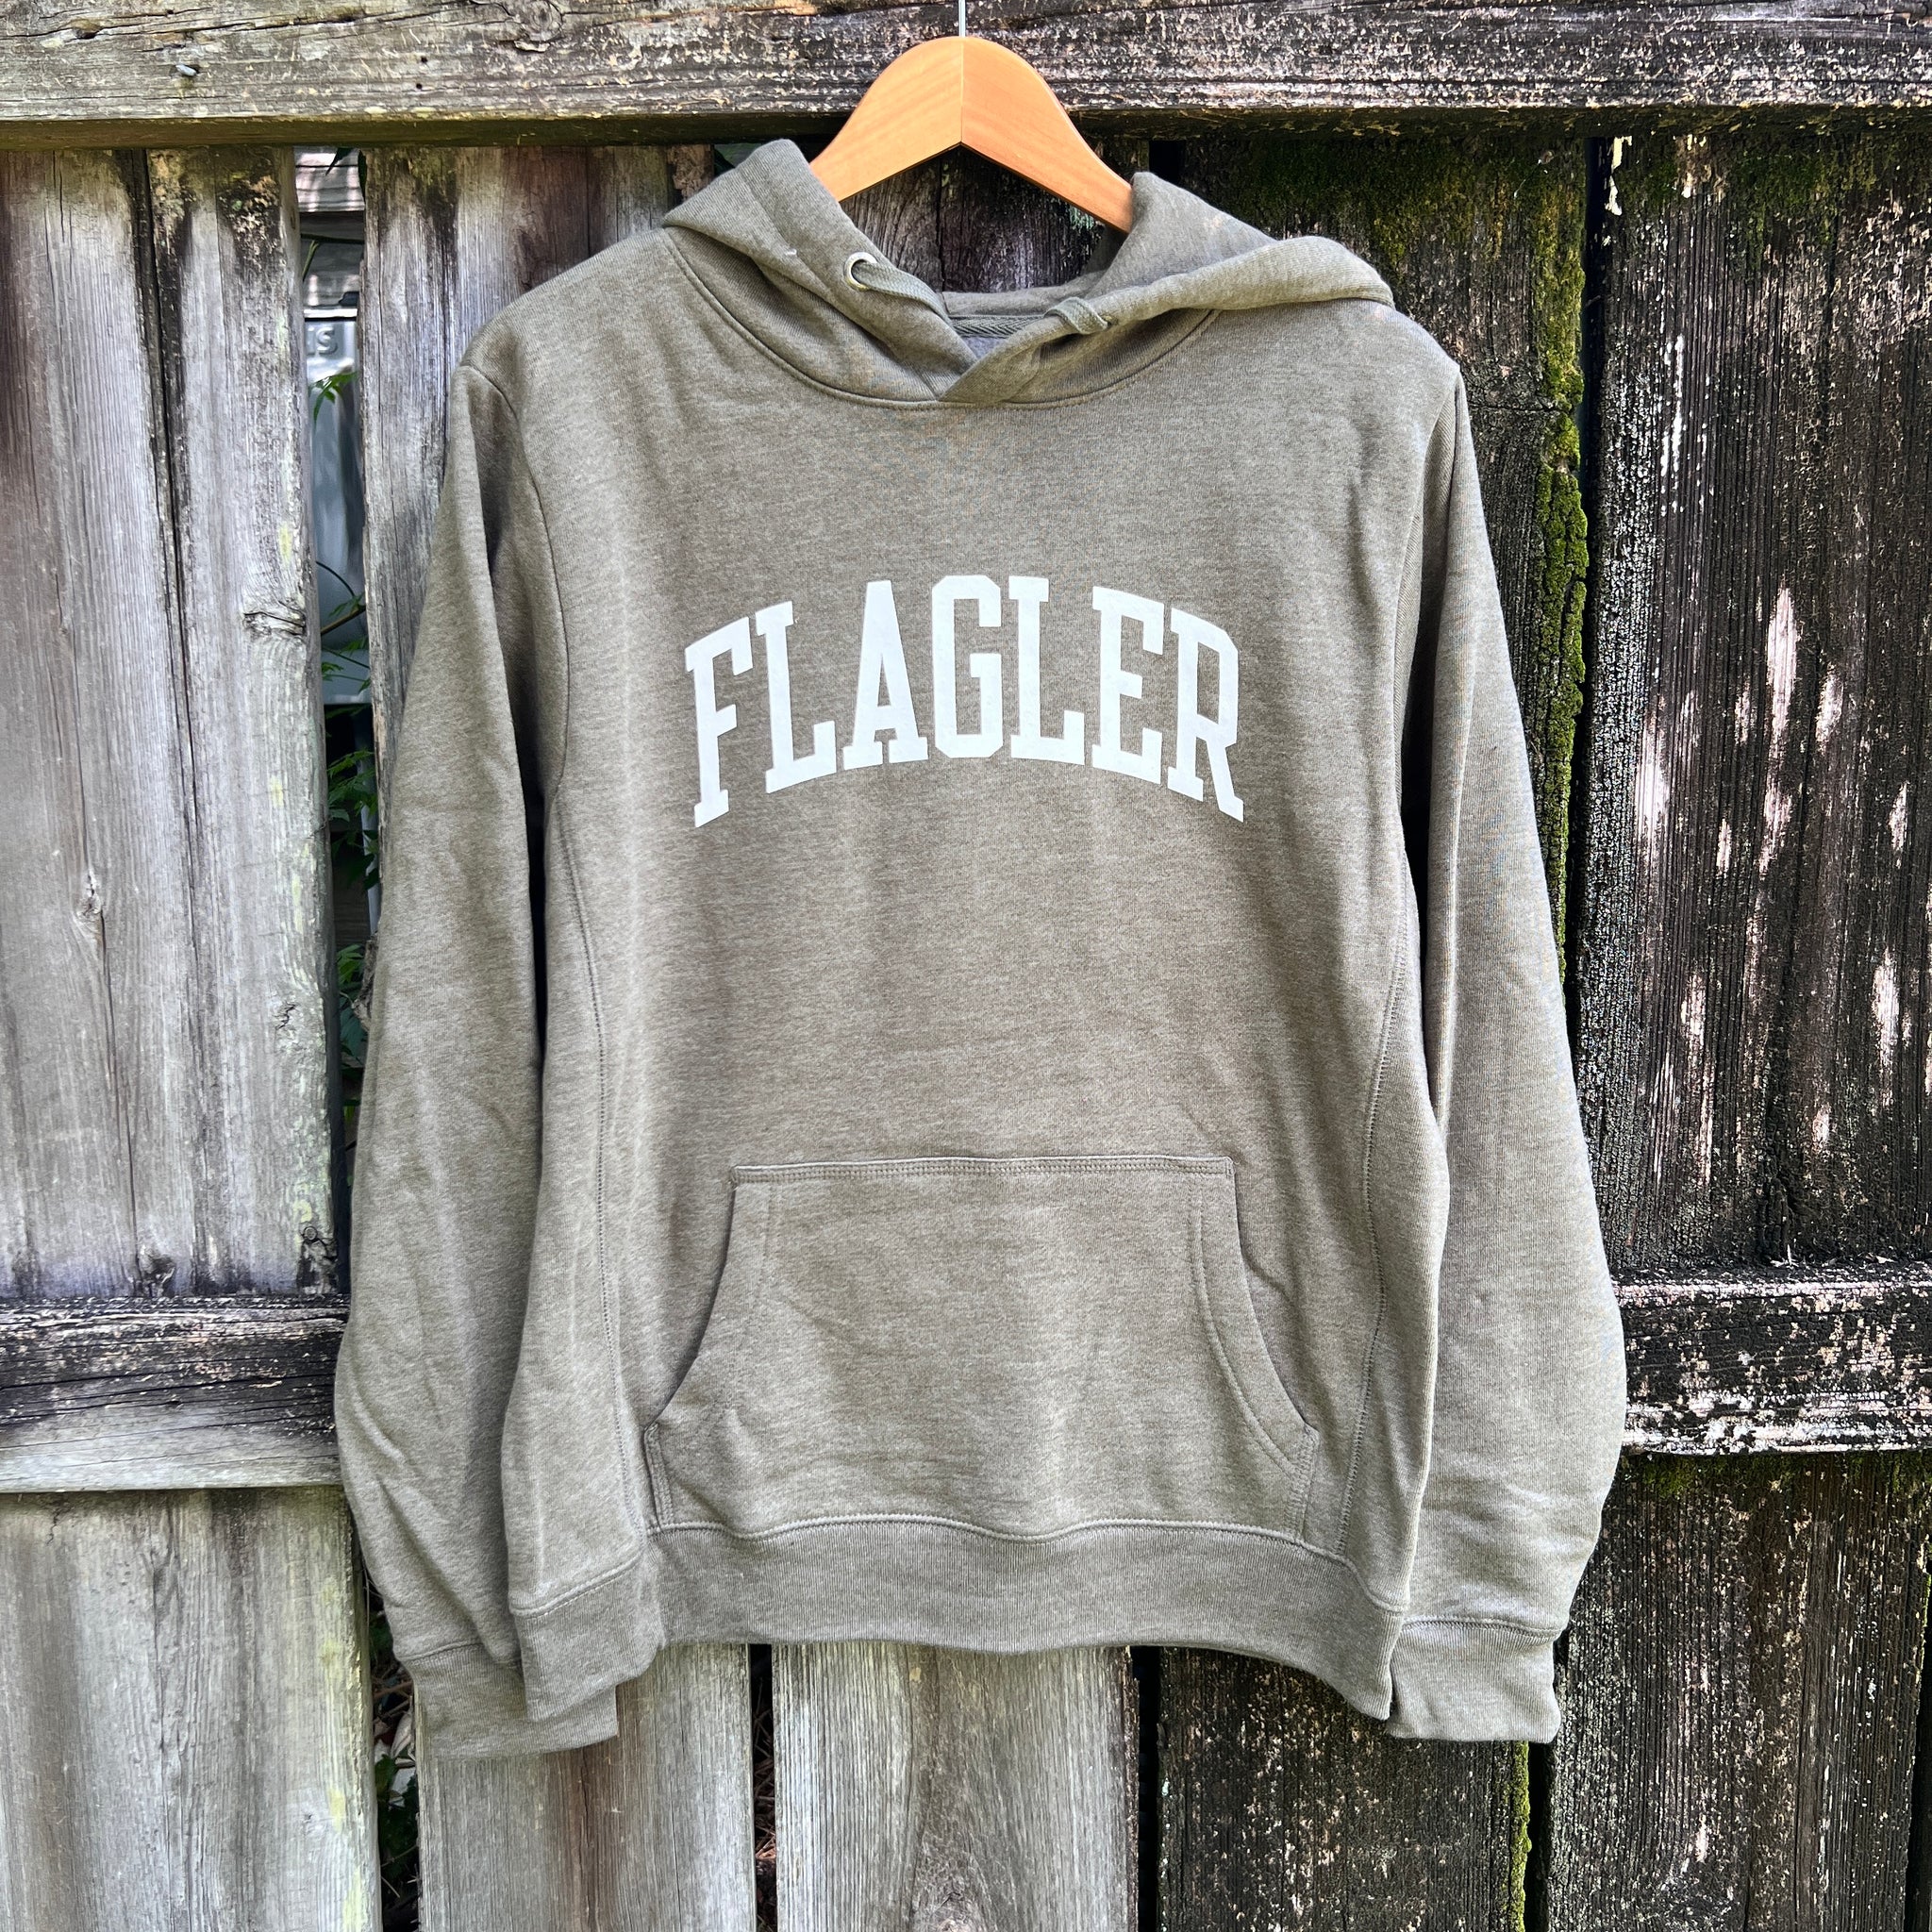 Olive solid hooded sweatshirt with white imprint saying Flagler